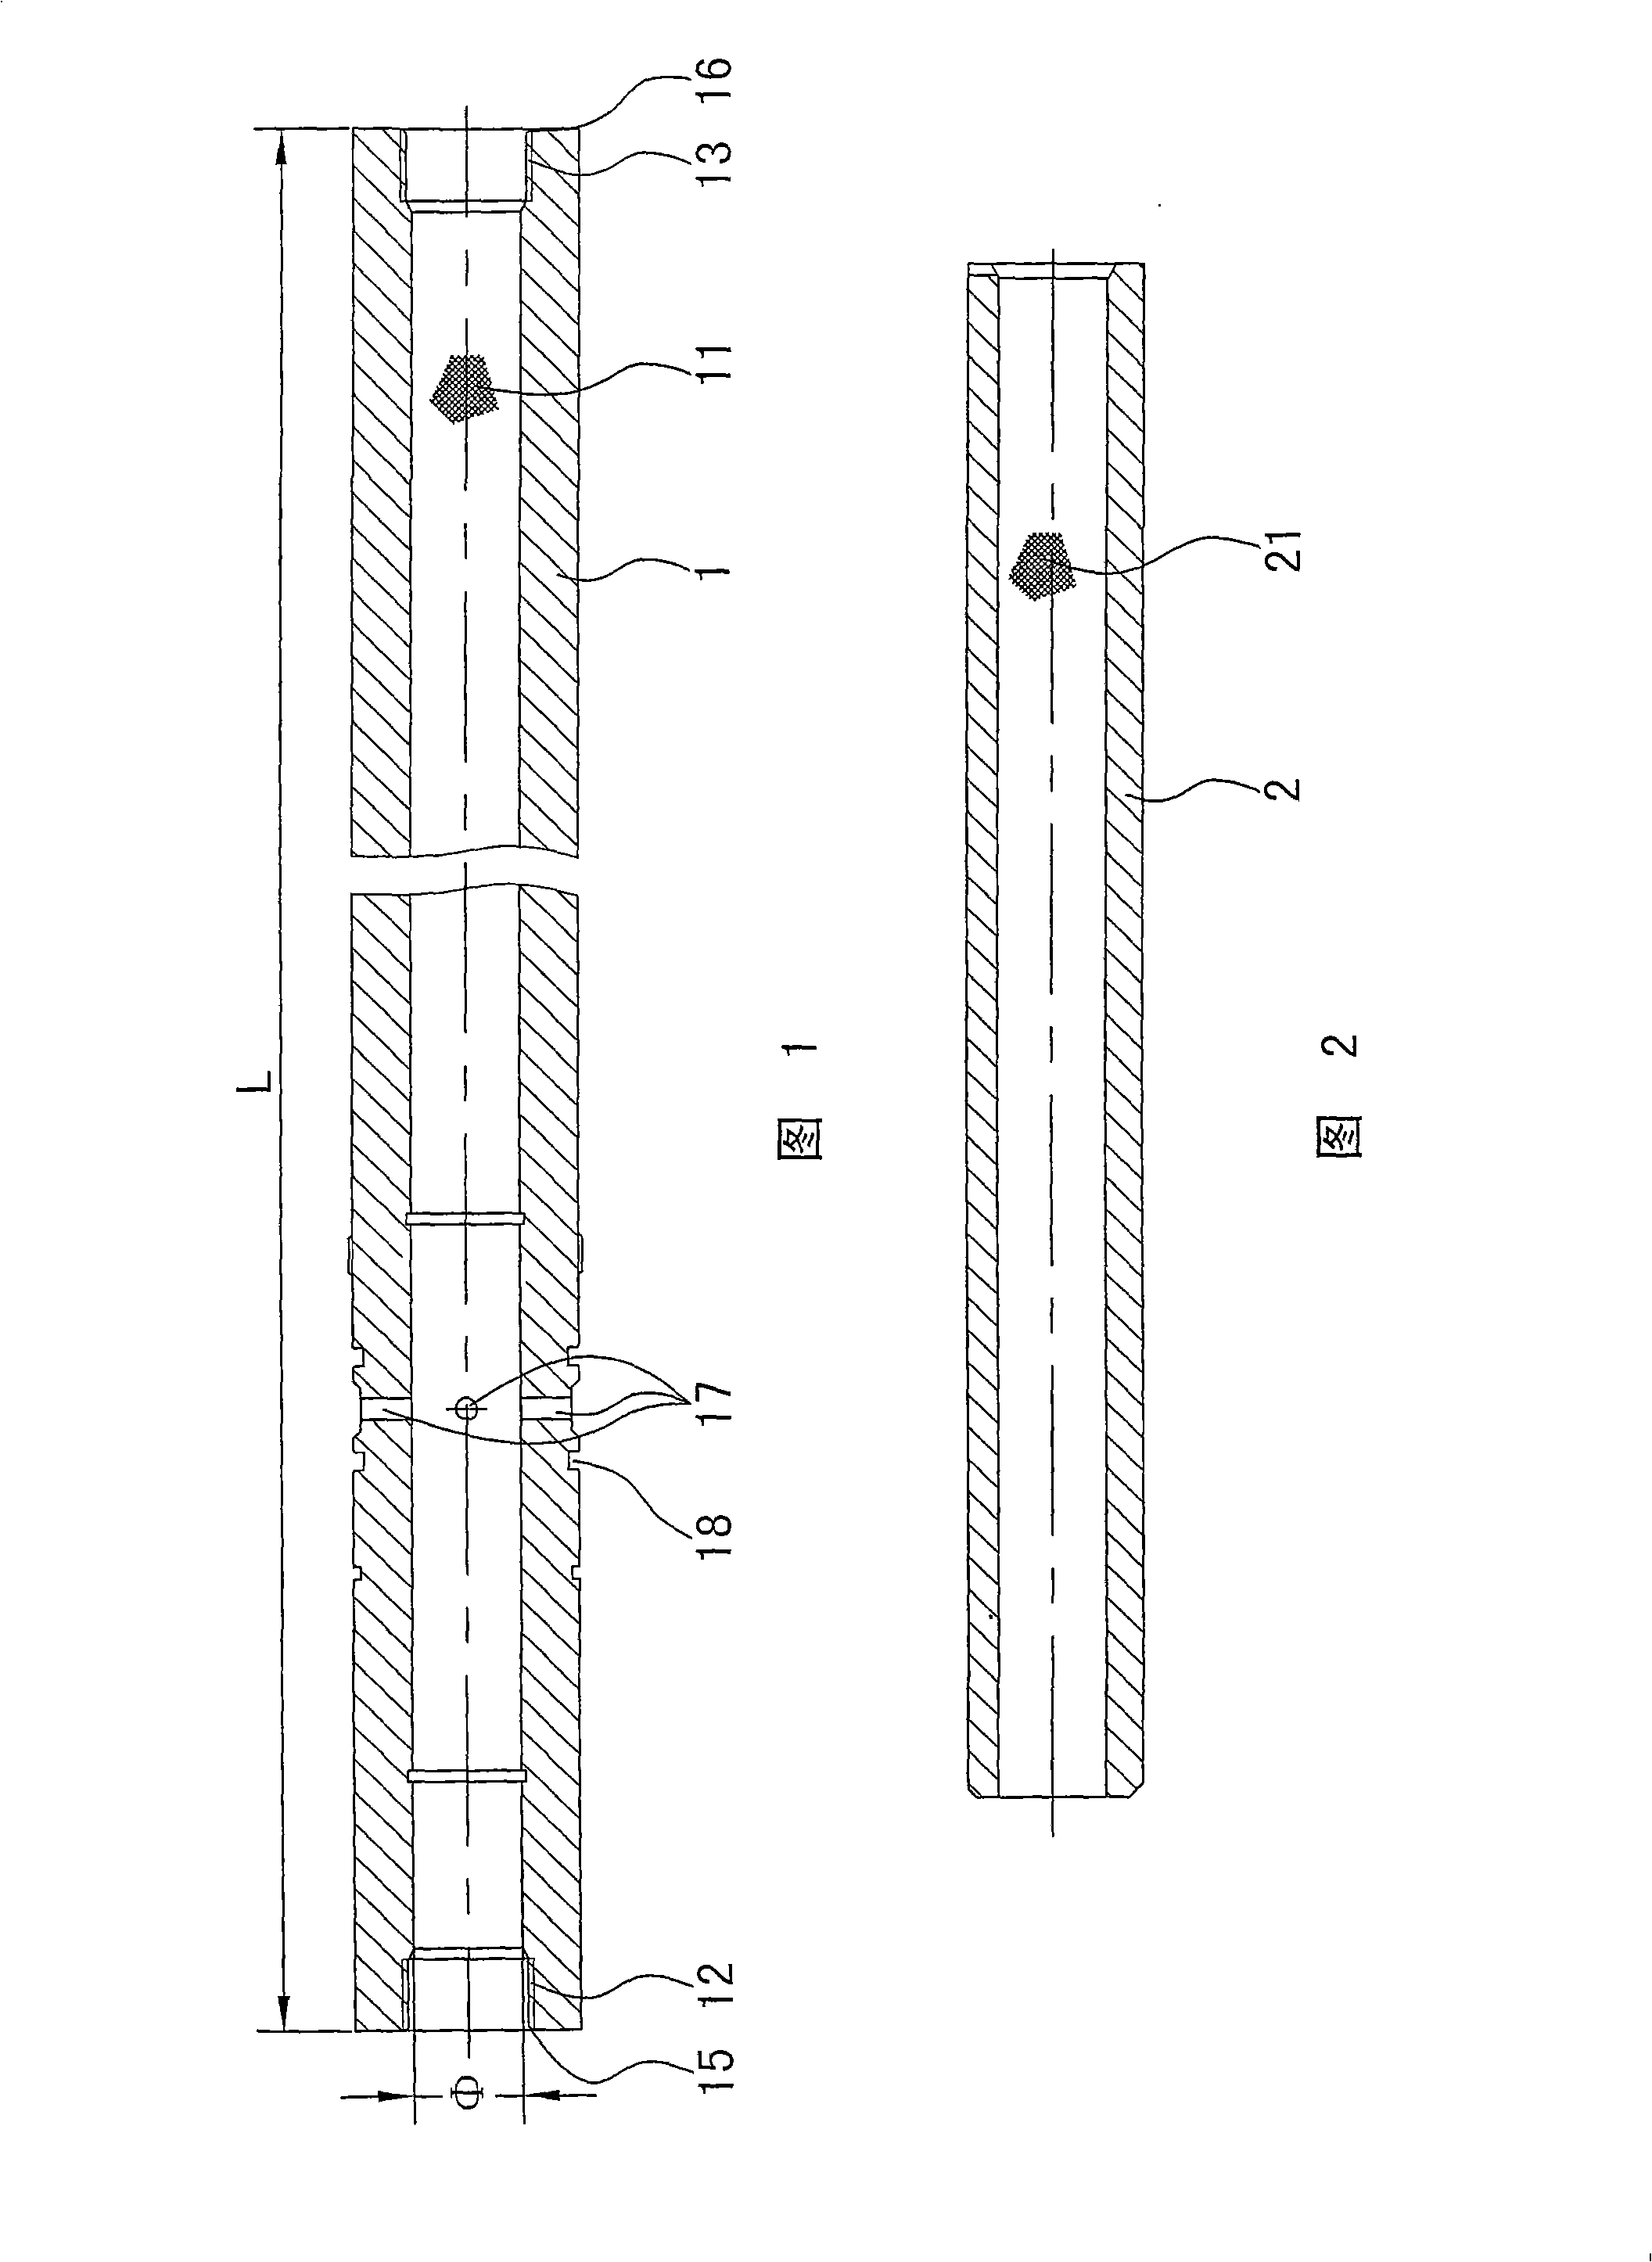 Long-stroke pneumatic hydraulic cylinder body and its processing method